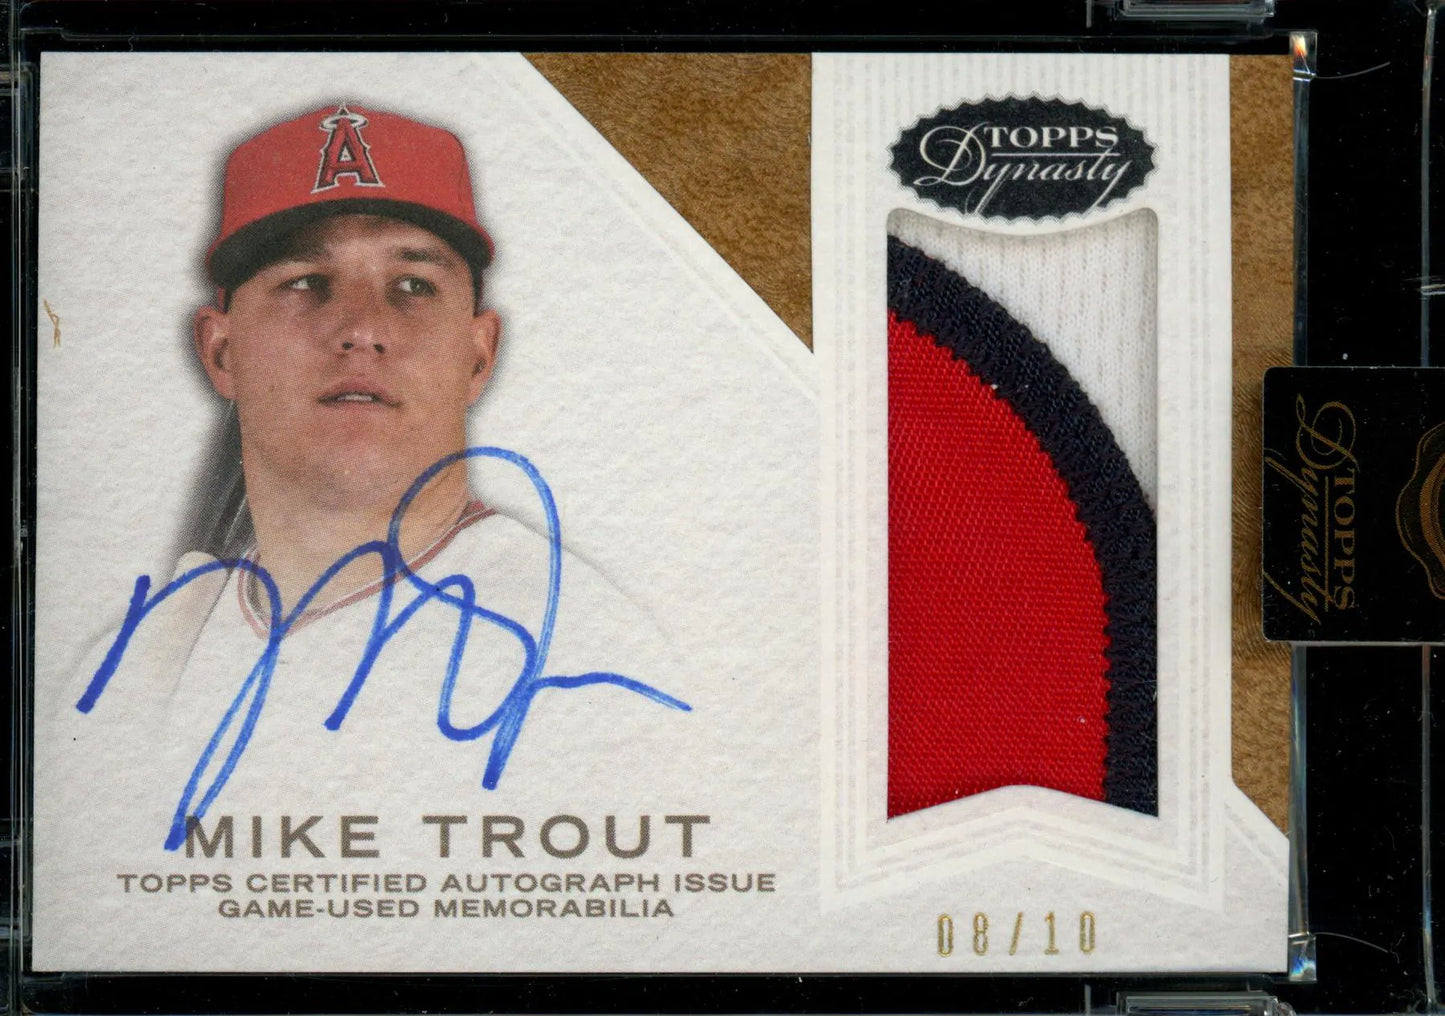 2023 Hit Parade Baseball Autographed Limited Edition Series 23 Hobby Box - Mike Trout